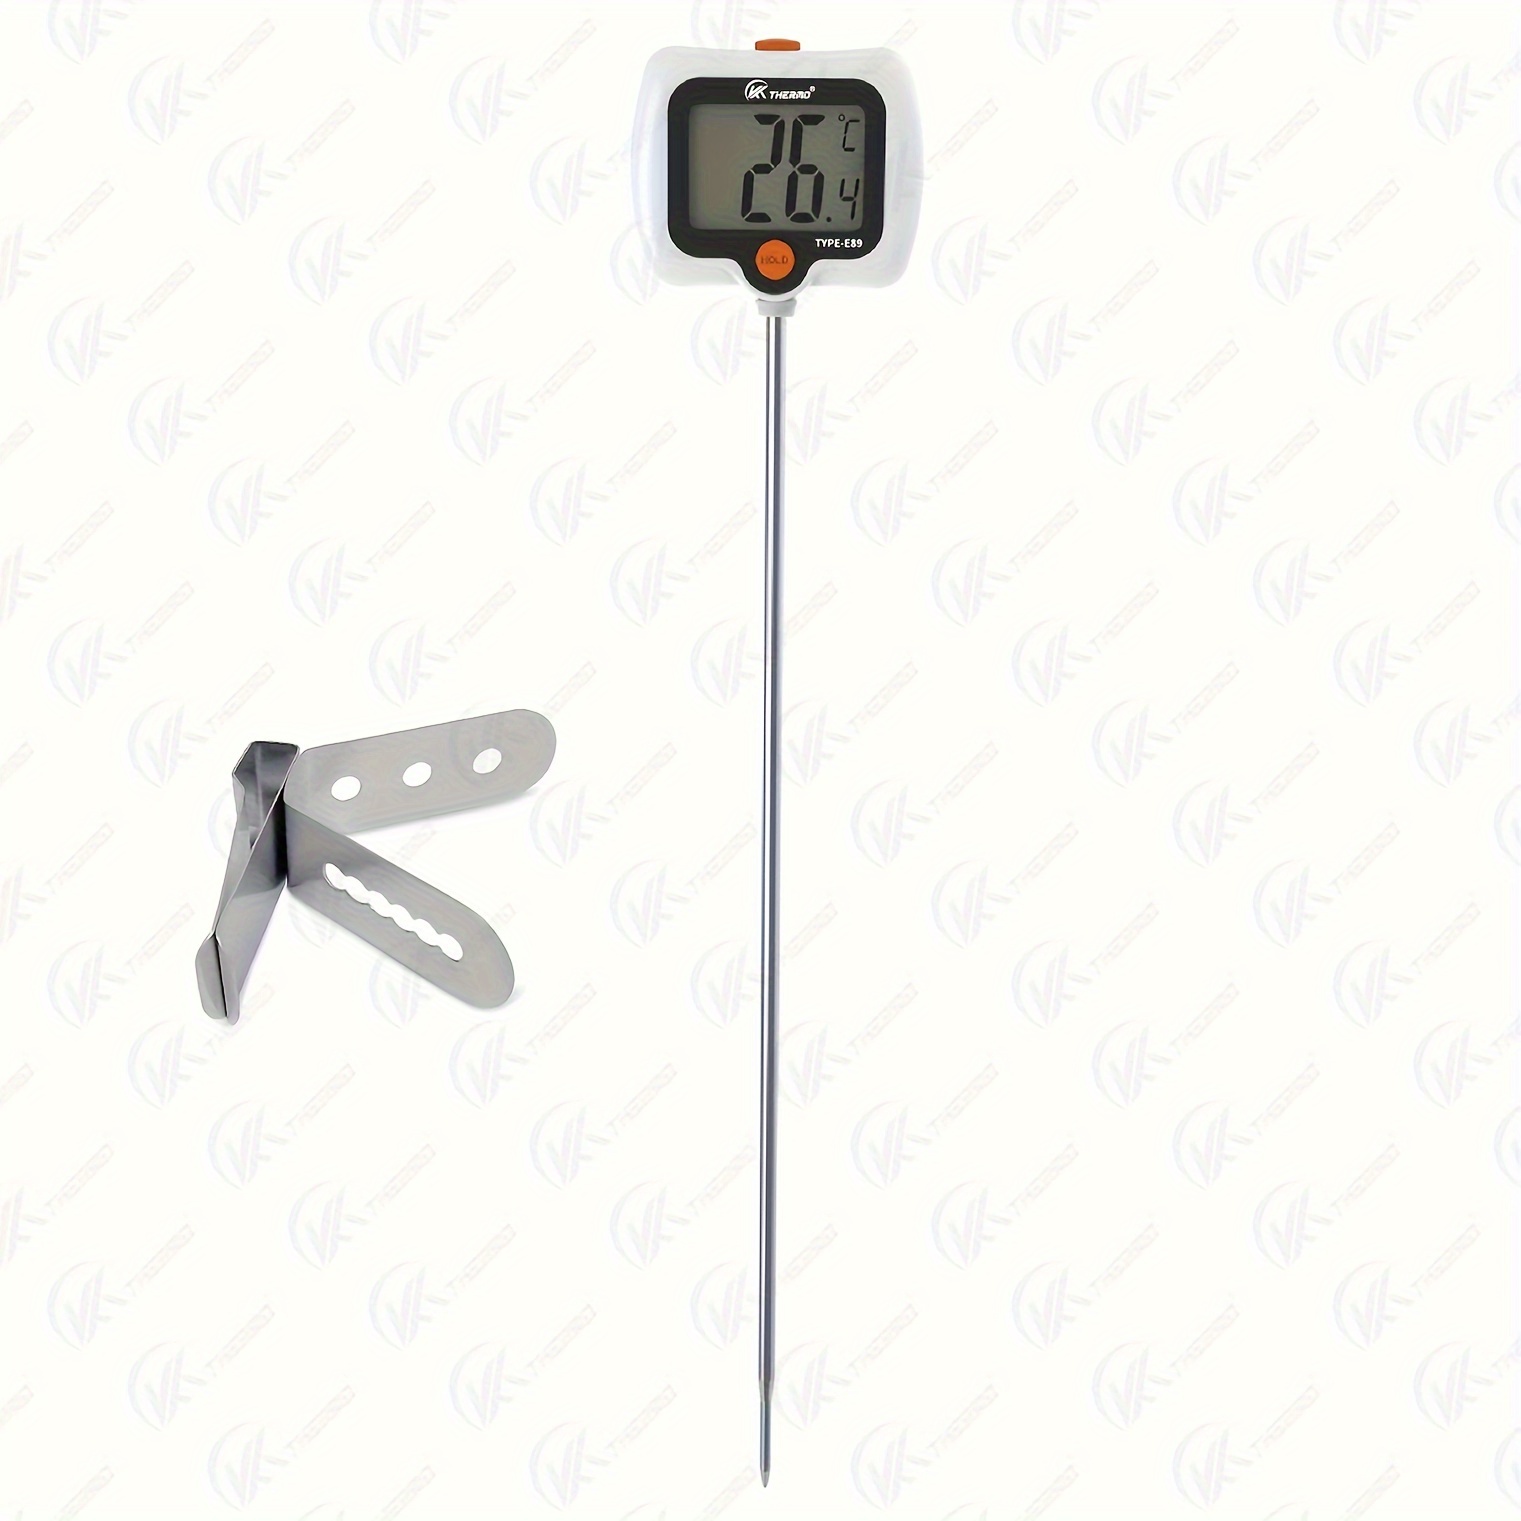 Digital Candy Thermometer For Candy Making With Pot Clip,Rotatory